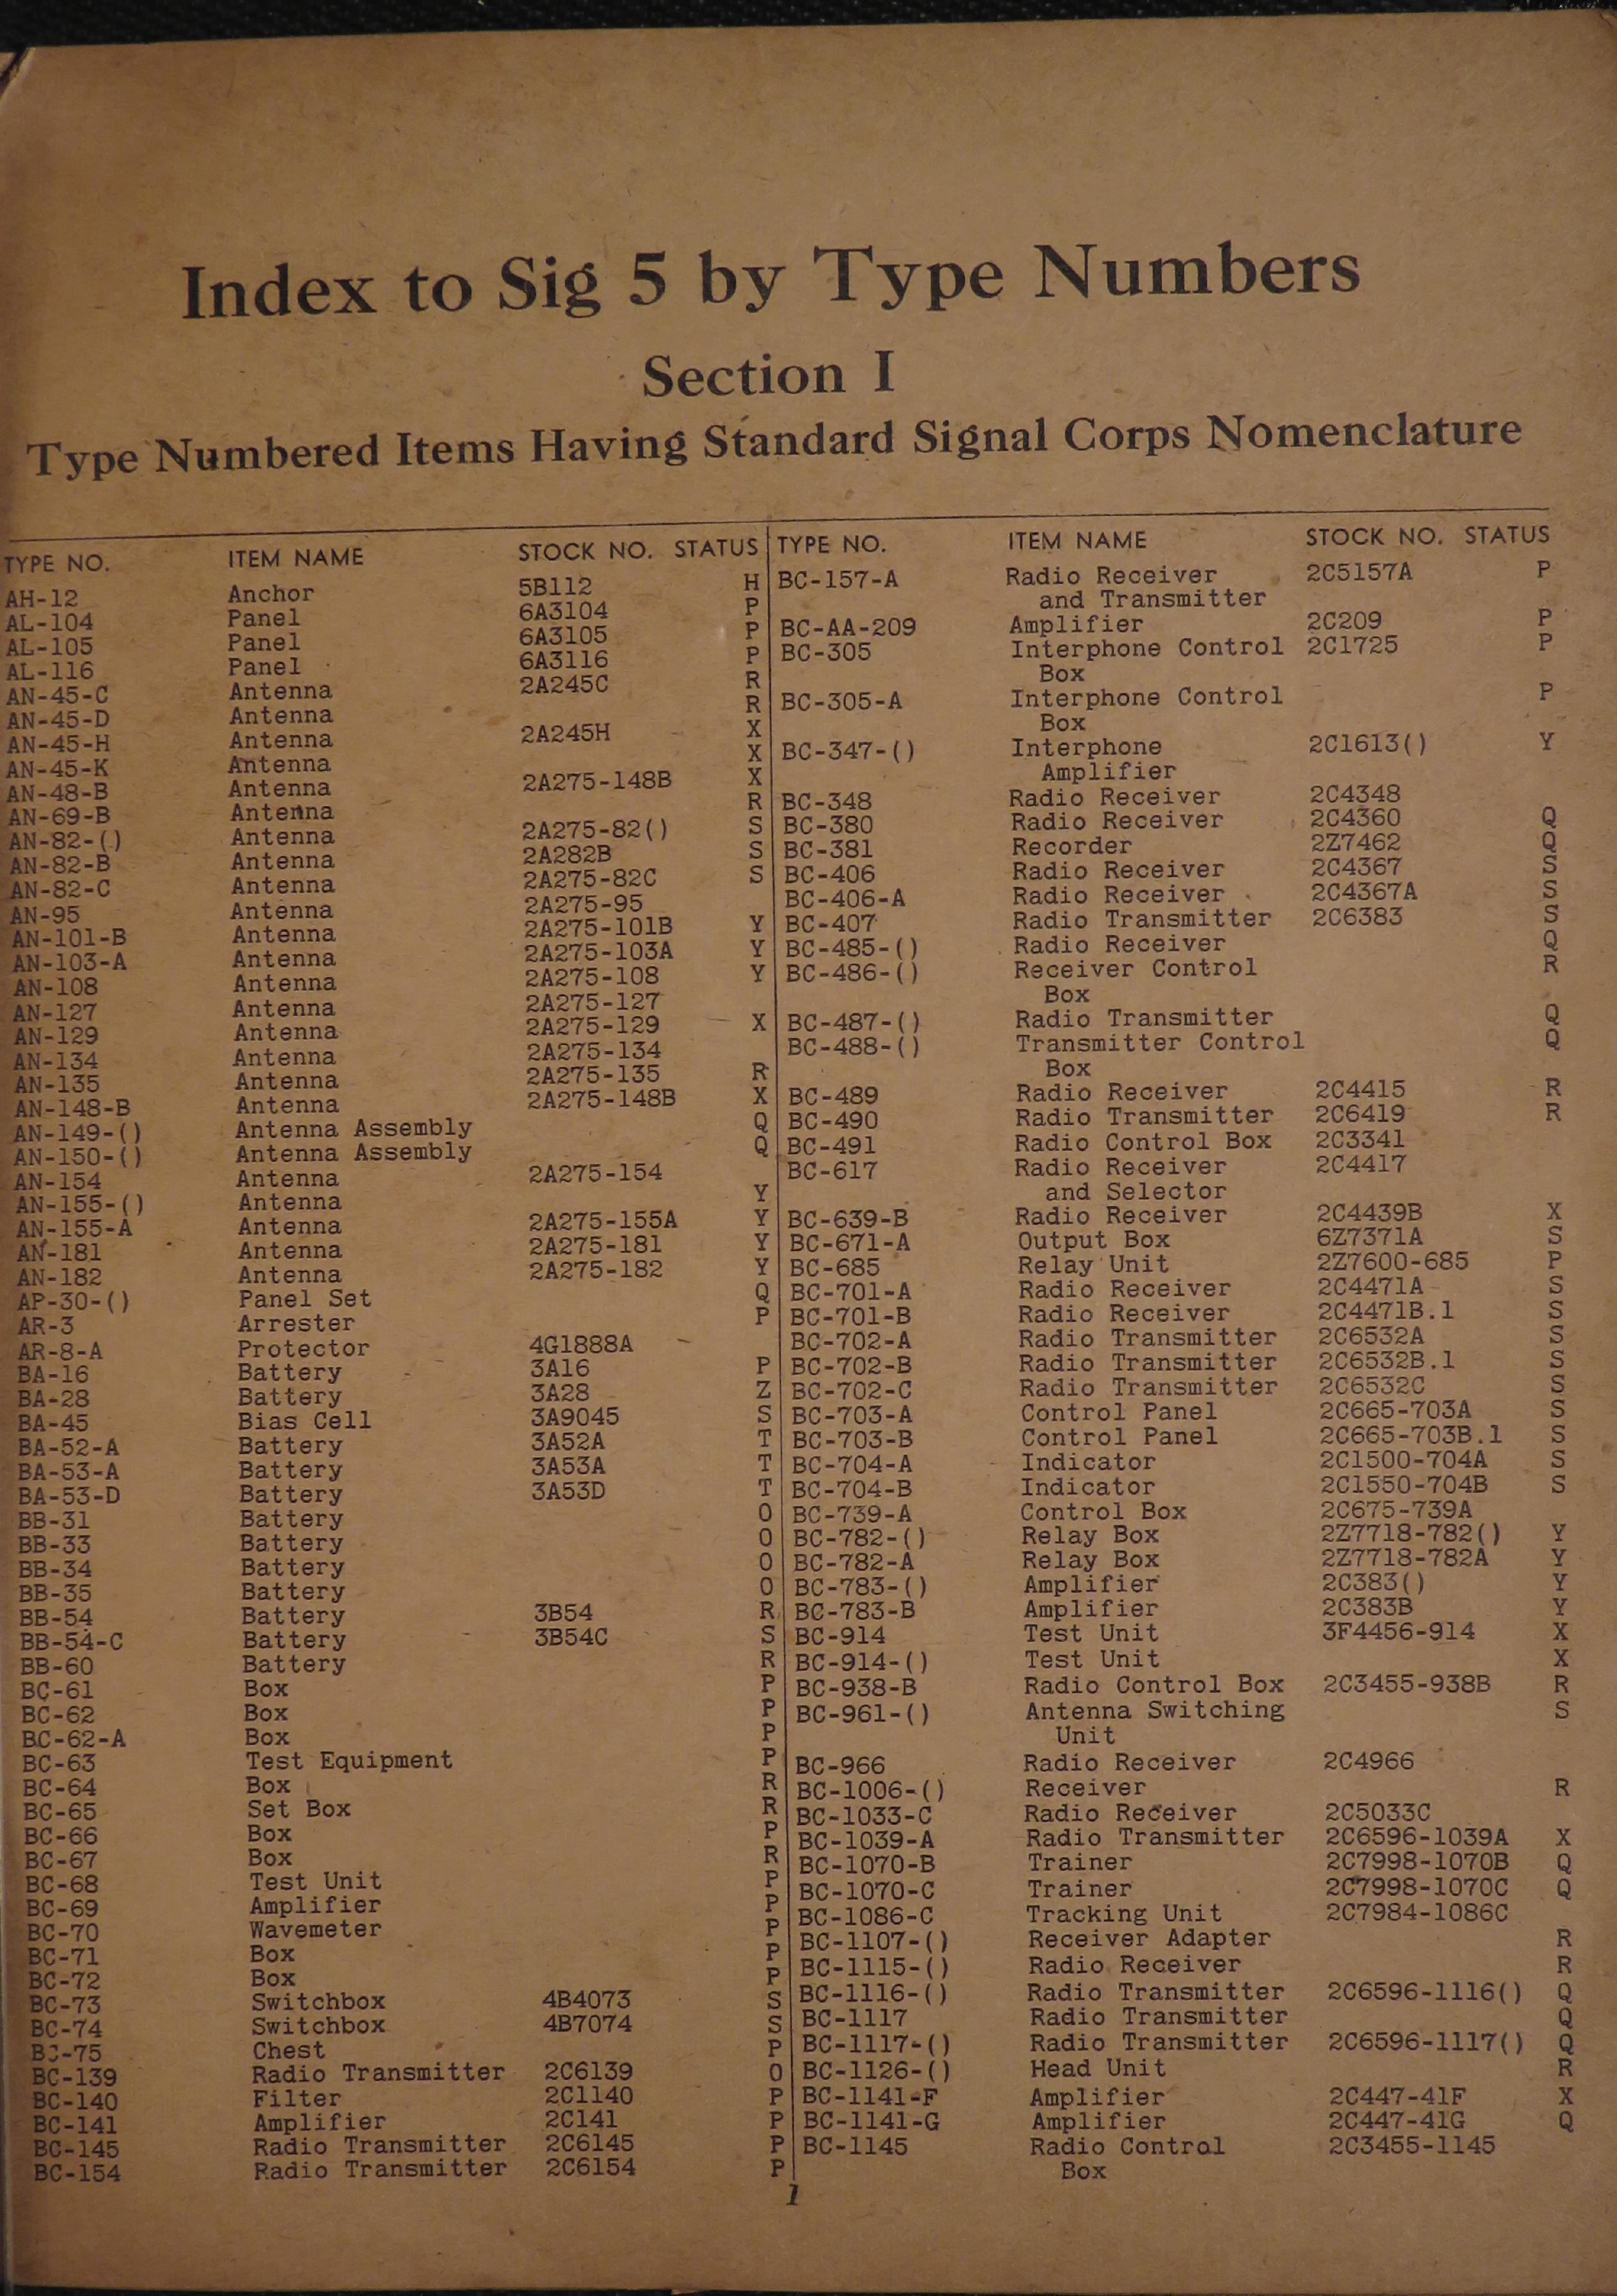 Sample page 5 from AirCorps Library document: Army Air Forces Signal Supply Catalog Index by Type Numbers